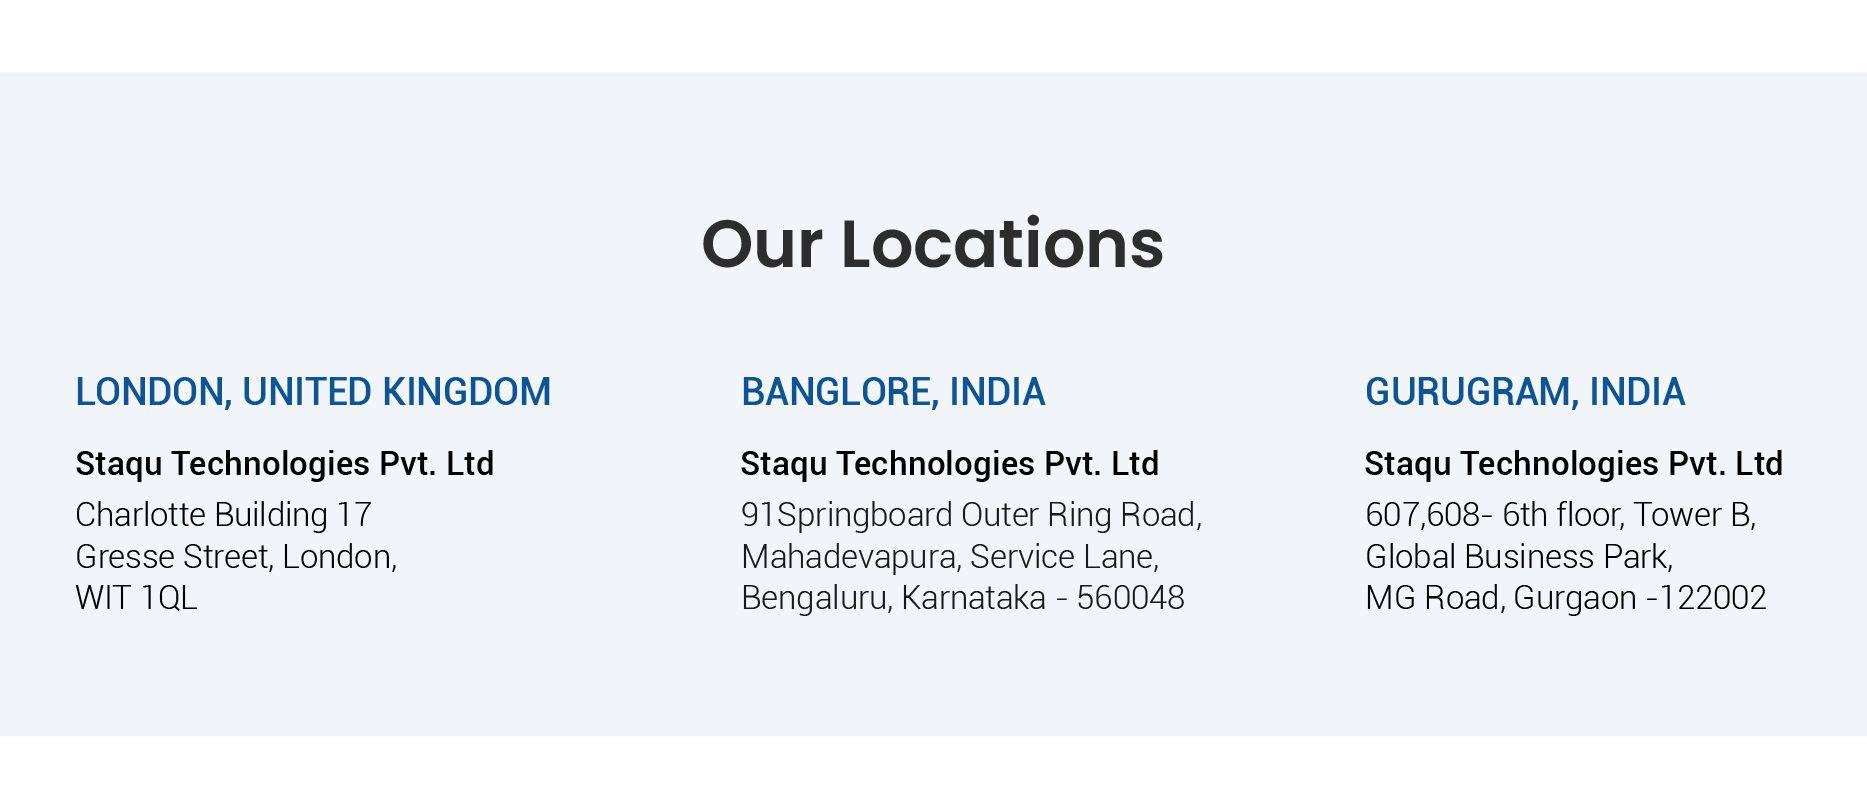 Our locations - Staqu Technologies